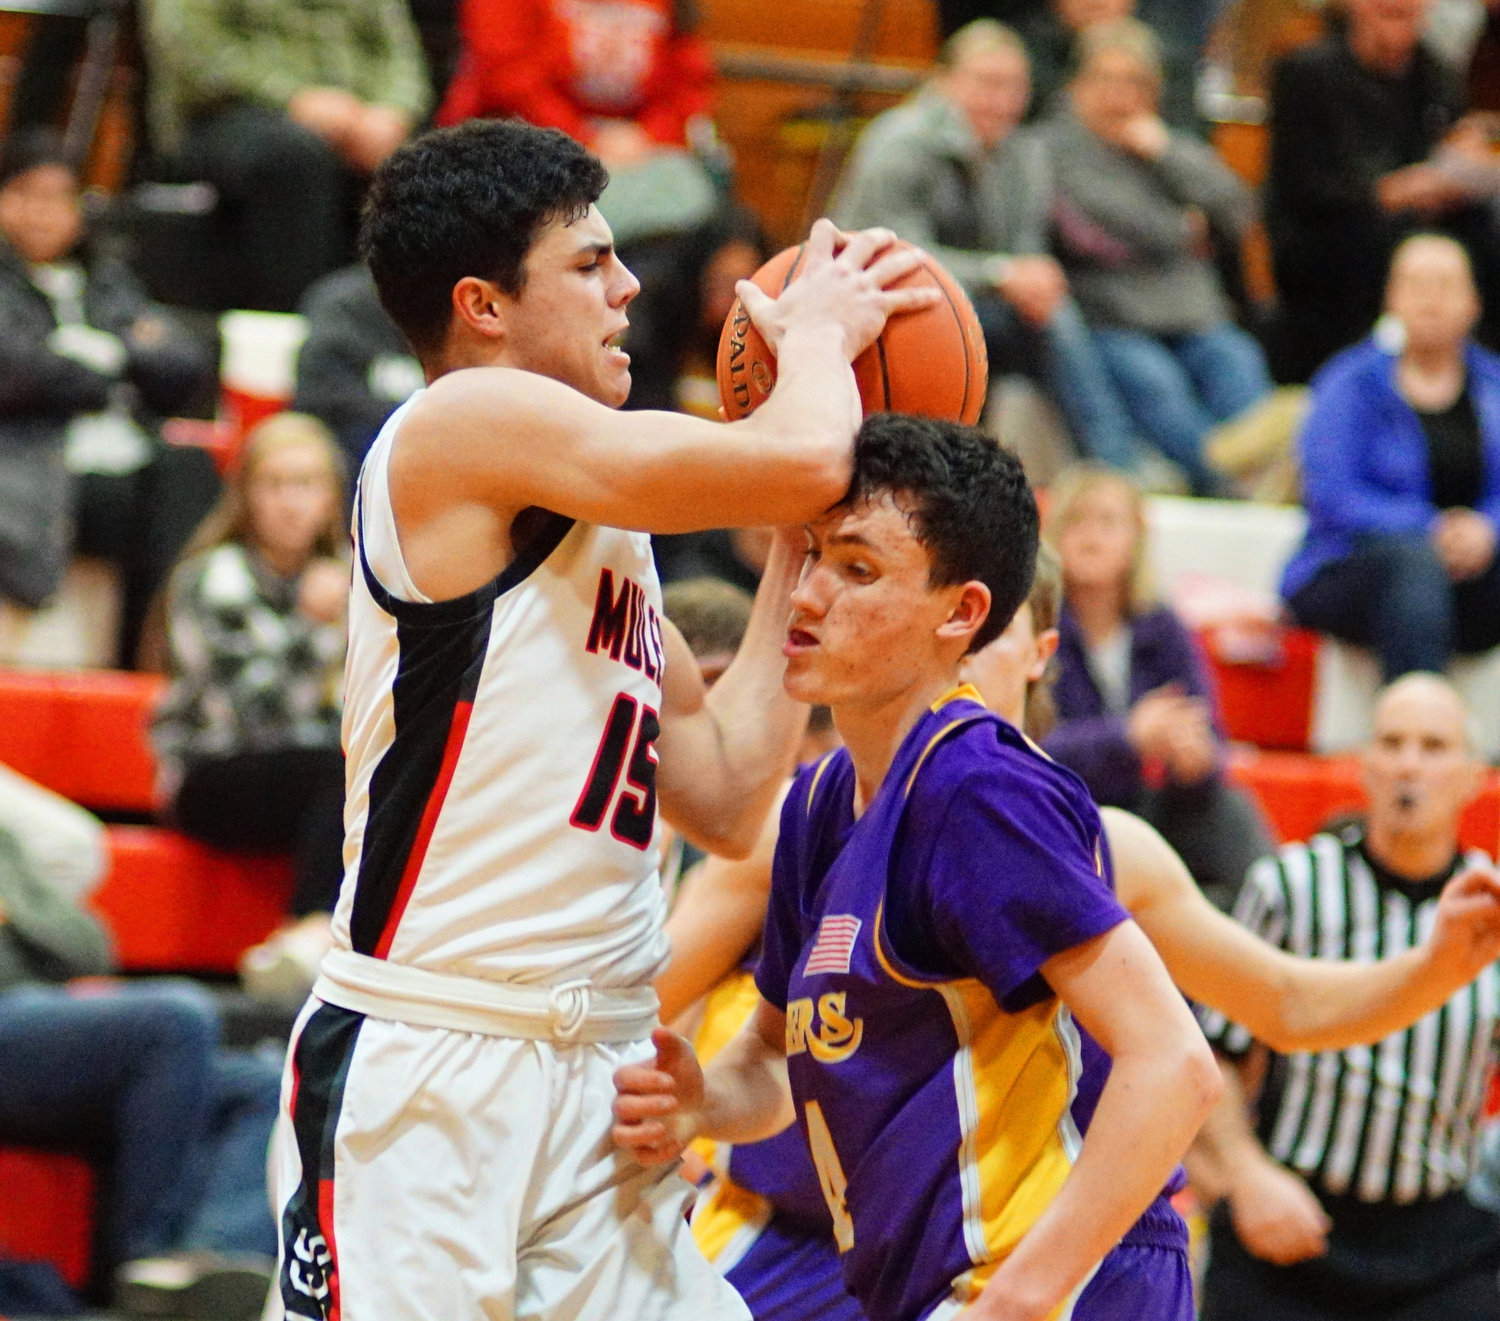 Wahkiakum's Dominic Curl pivots against defense from Onalaska's Carter Whitehead on Monday in Cathlamet.